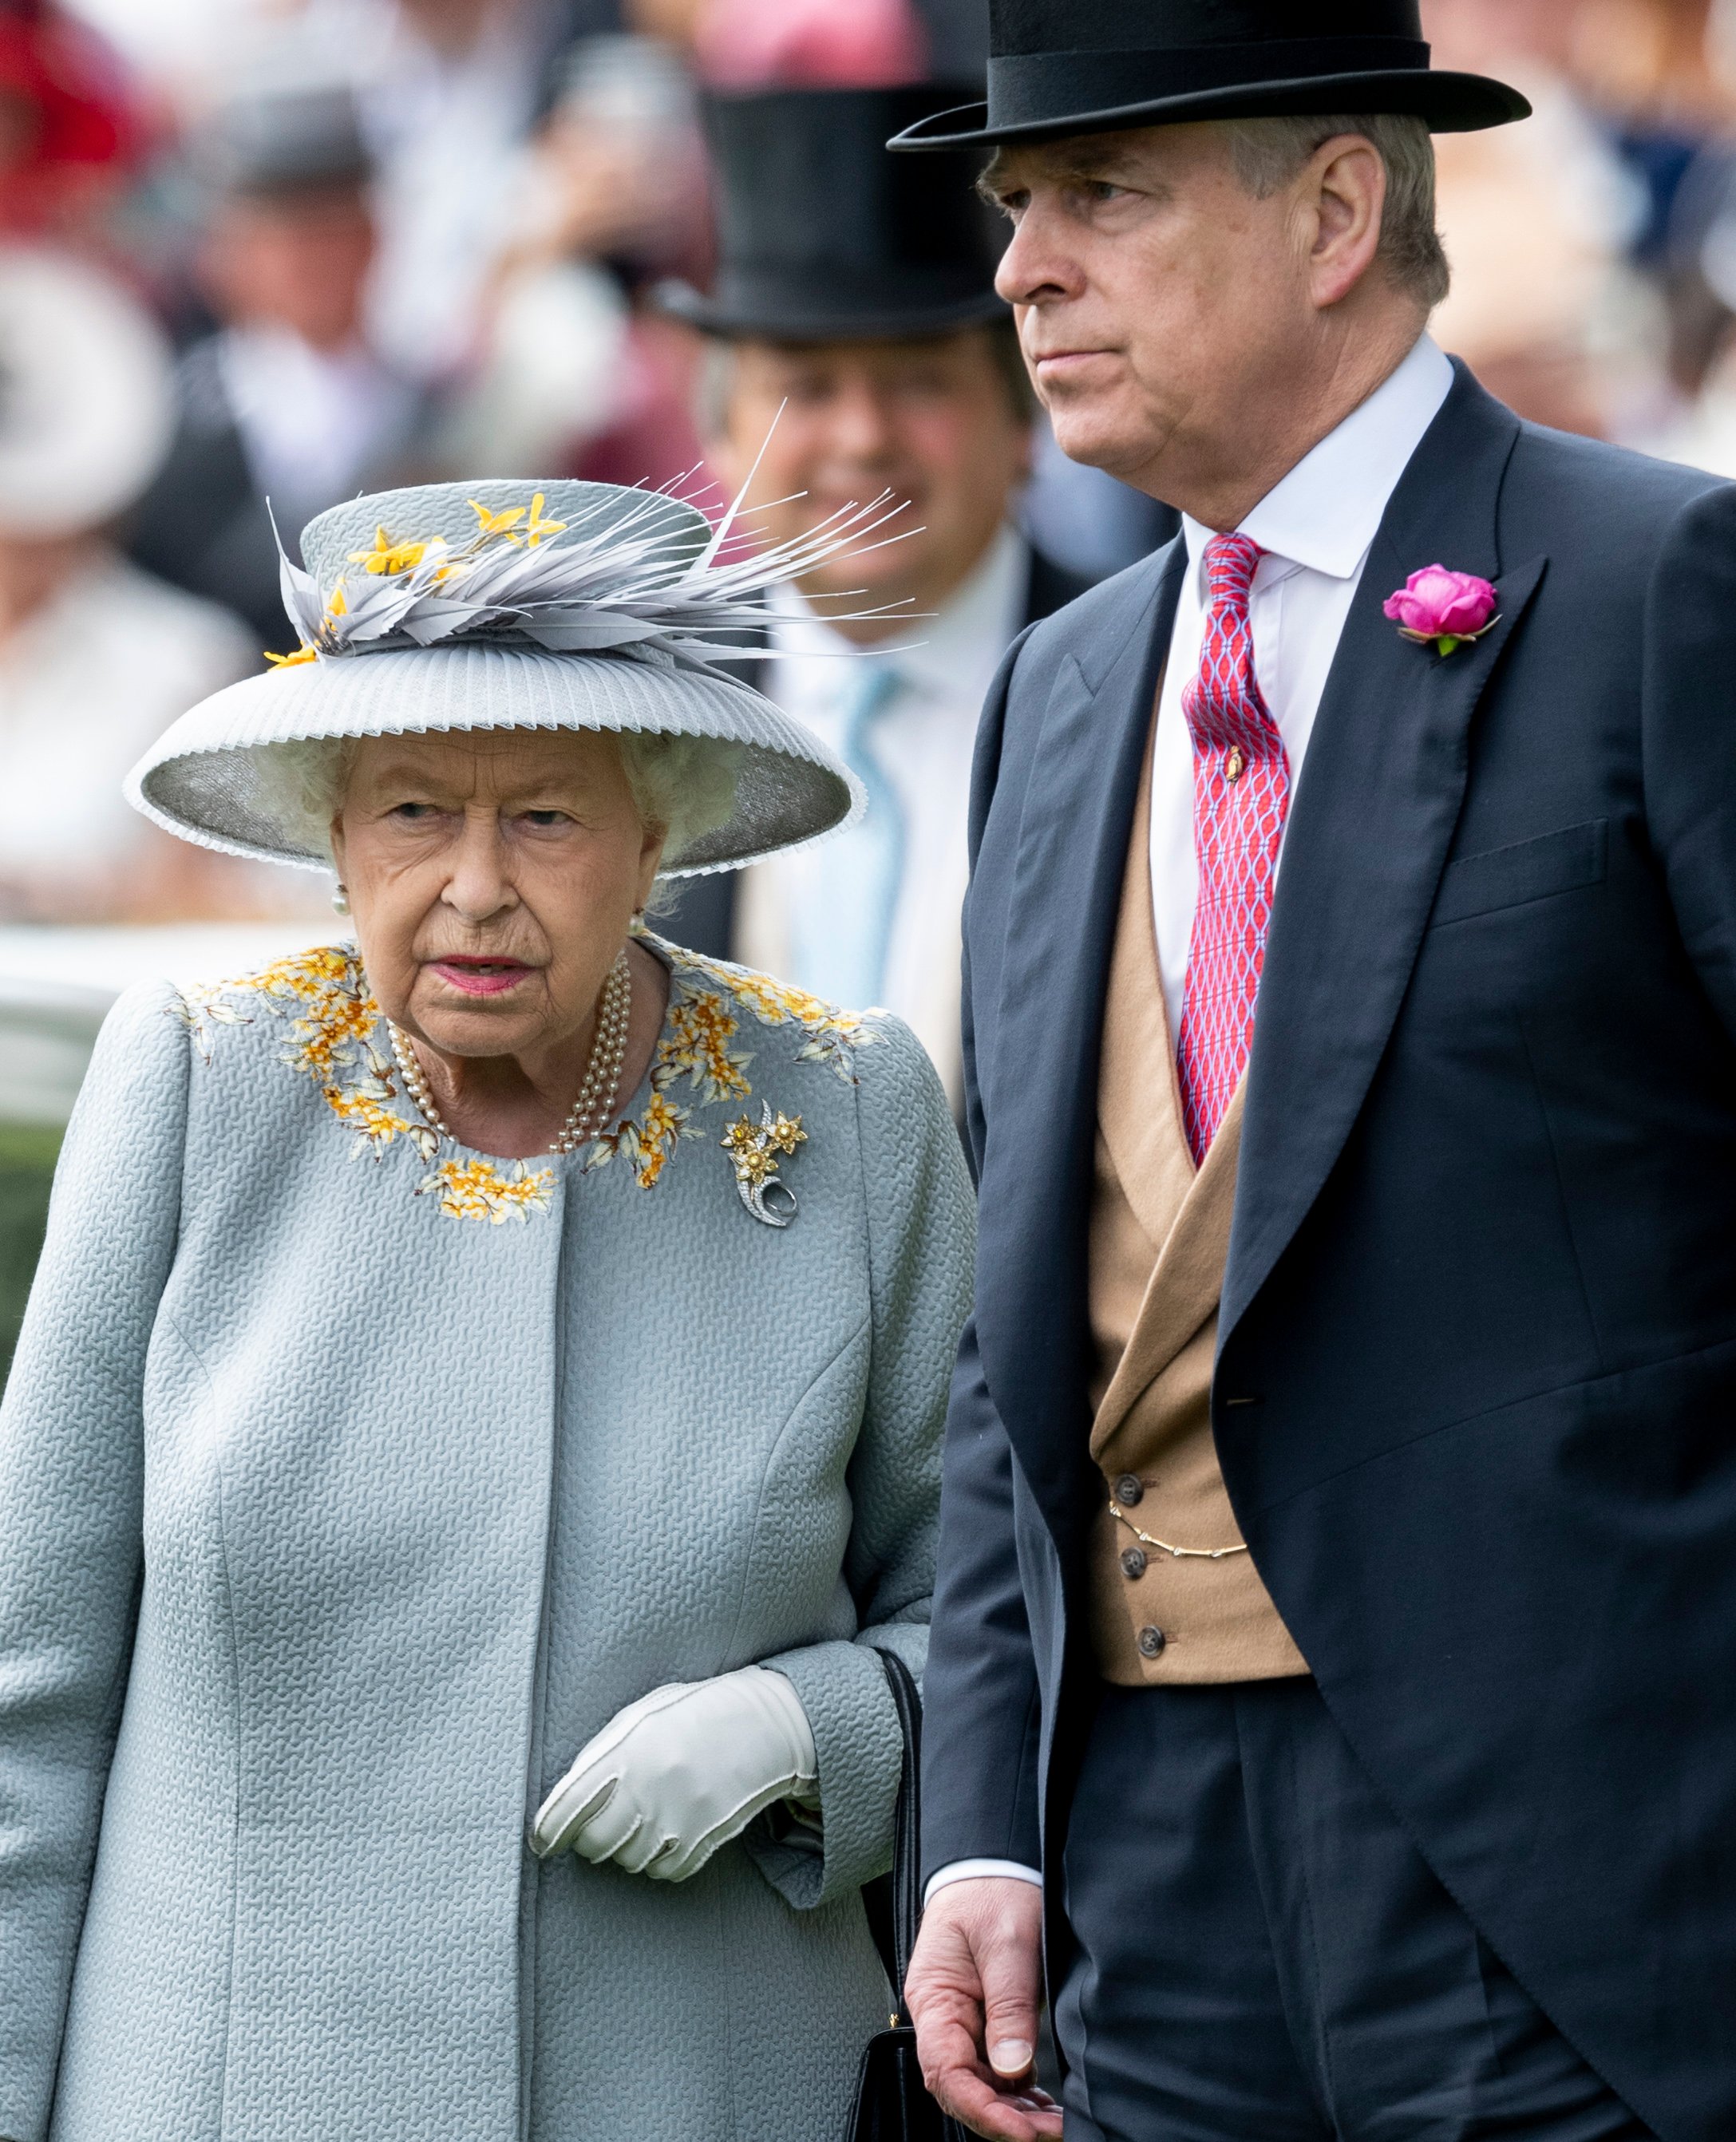 Prince Andrew and Queen Elizabeth II standing together at Ladies Day of Royal Ascot